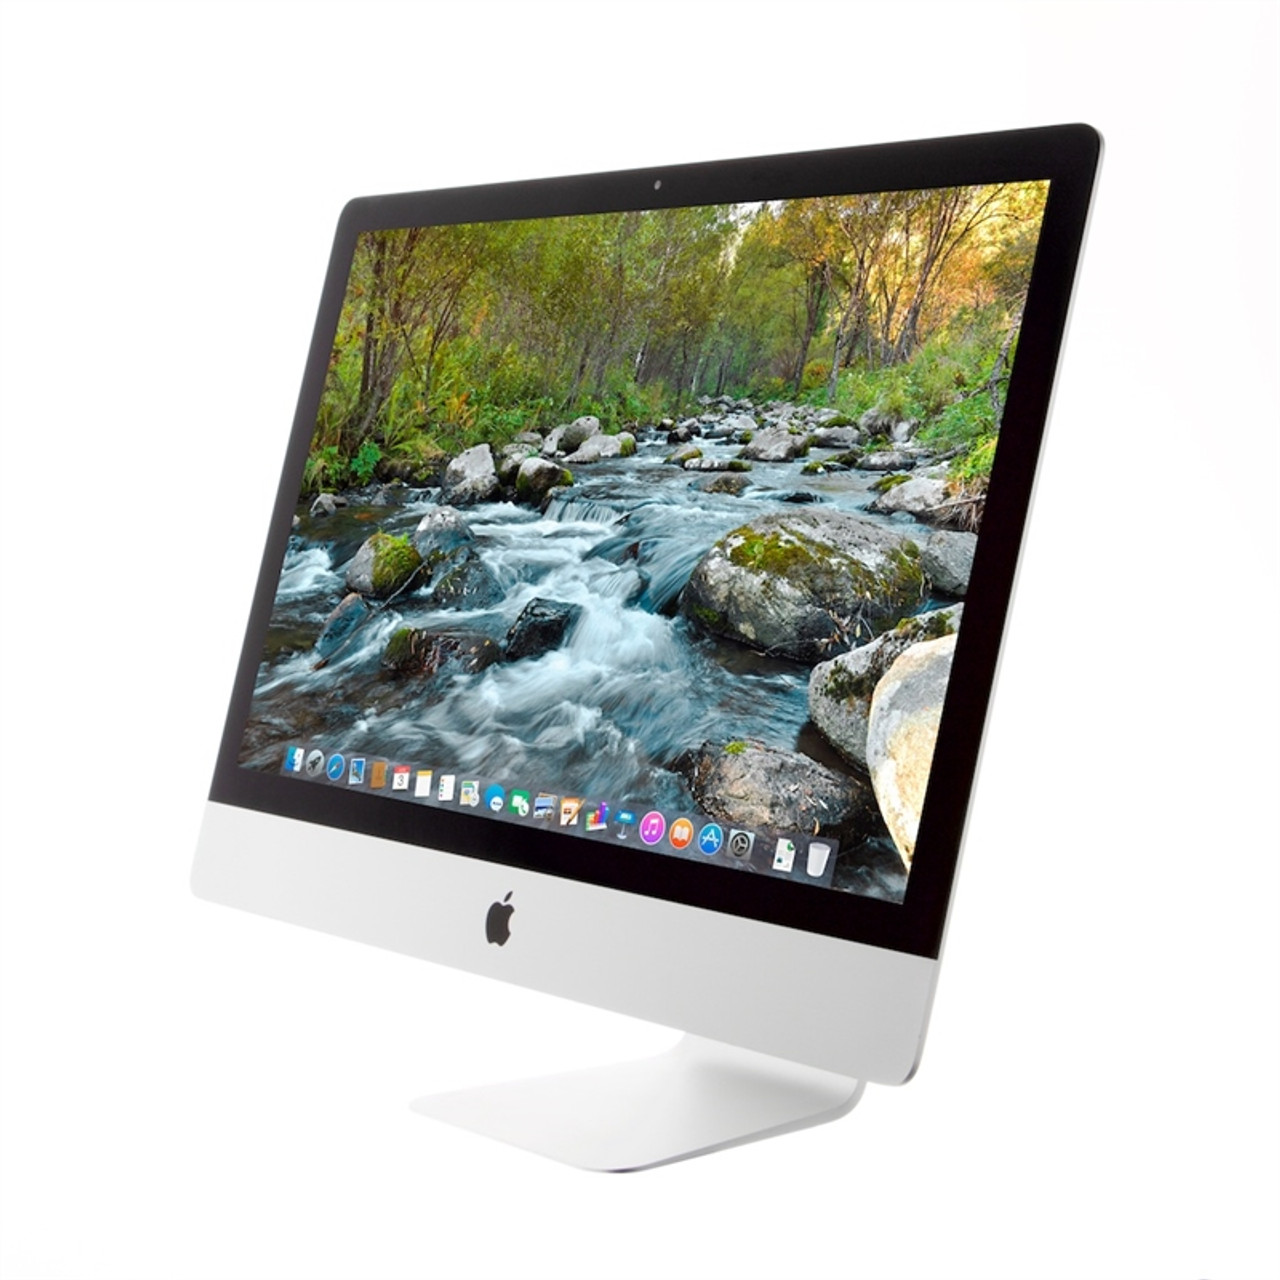 Apple iMac 27-inch 2.9GHz Quad-core i5 (Late 2012) MD095LL/A - Very Good  Condition